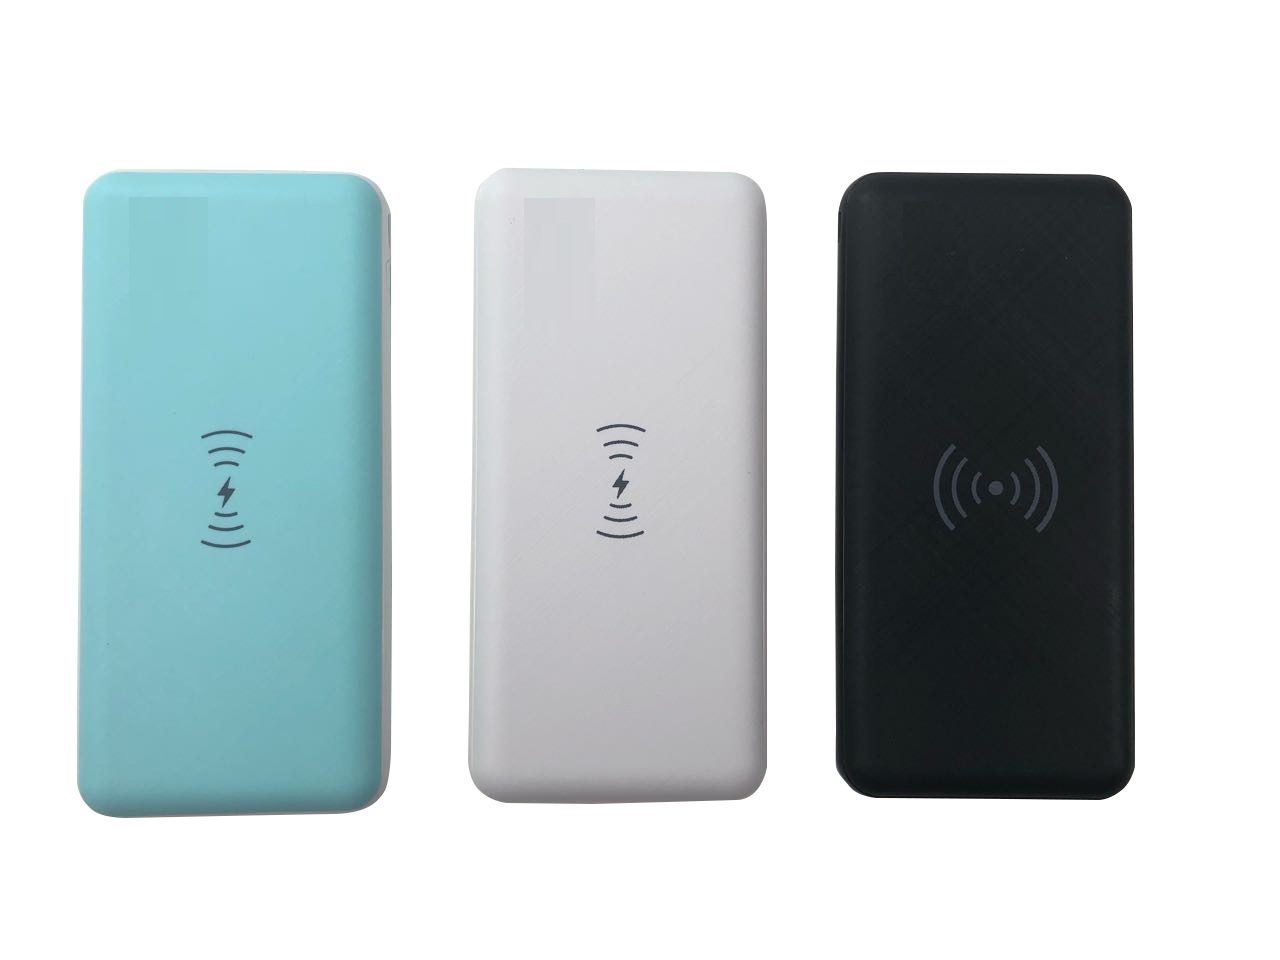 Wireless Battery Chargers in blue, white, and black